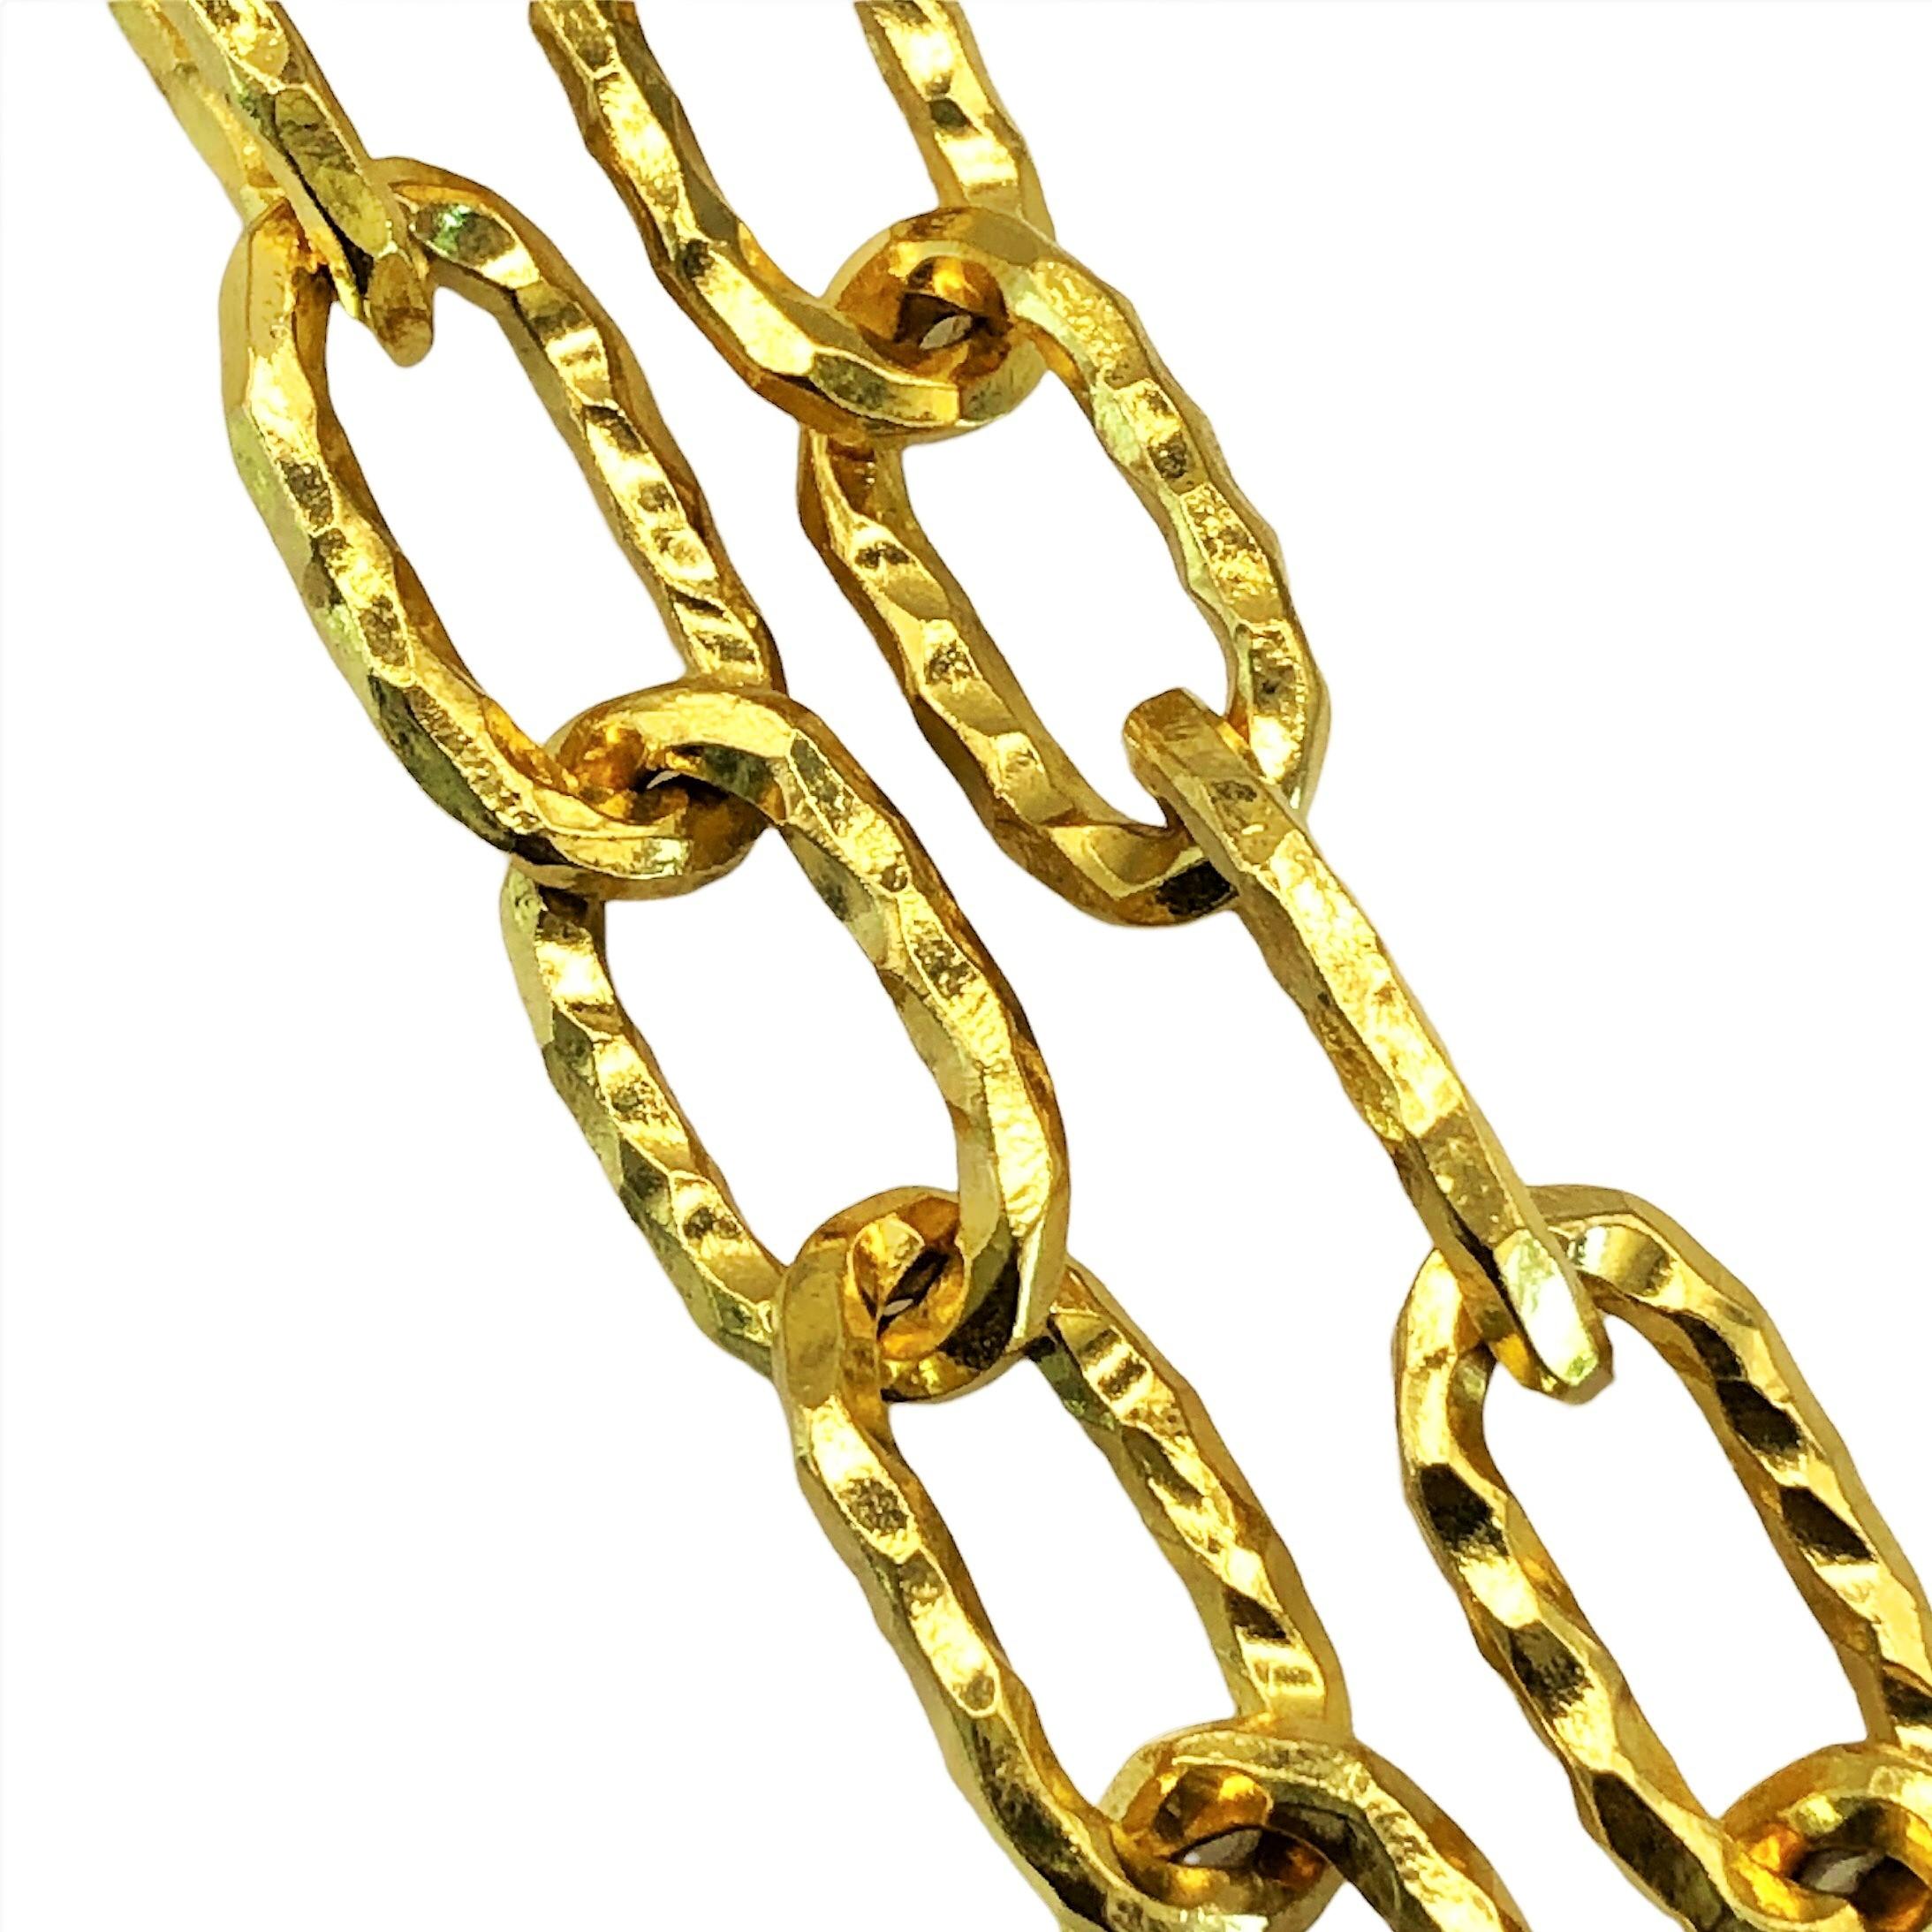 This unusually long and intricately hand worked 22K yellow gold Jean Mahie 30 inch neck chain is really quite exceptional. Each link, measuring a full 7/8 inches by 1/2 inches, is individually hand hammered over it's entire surface.  The very rich